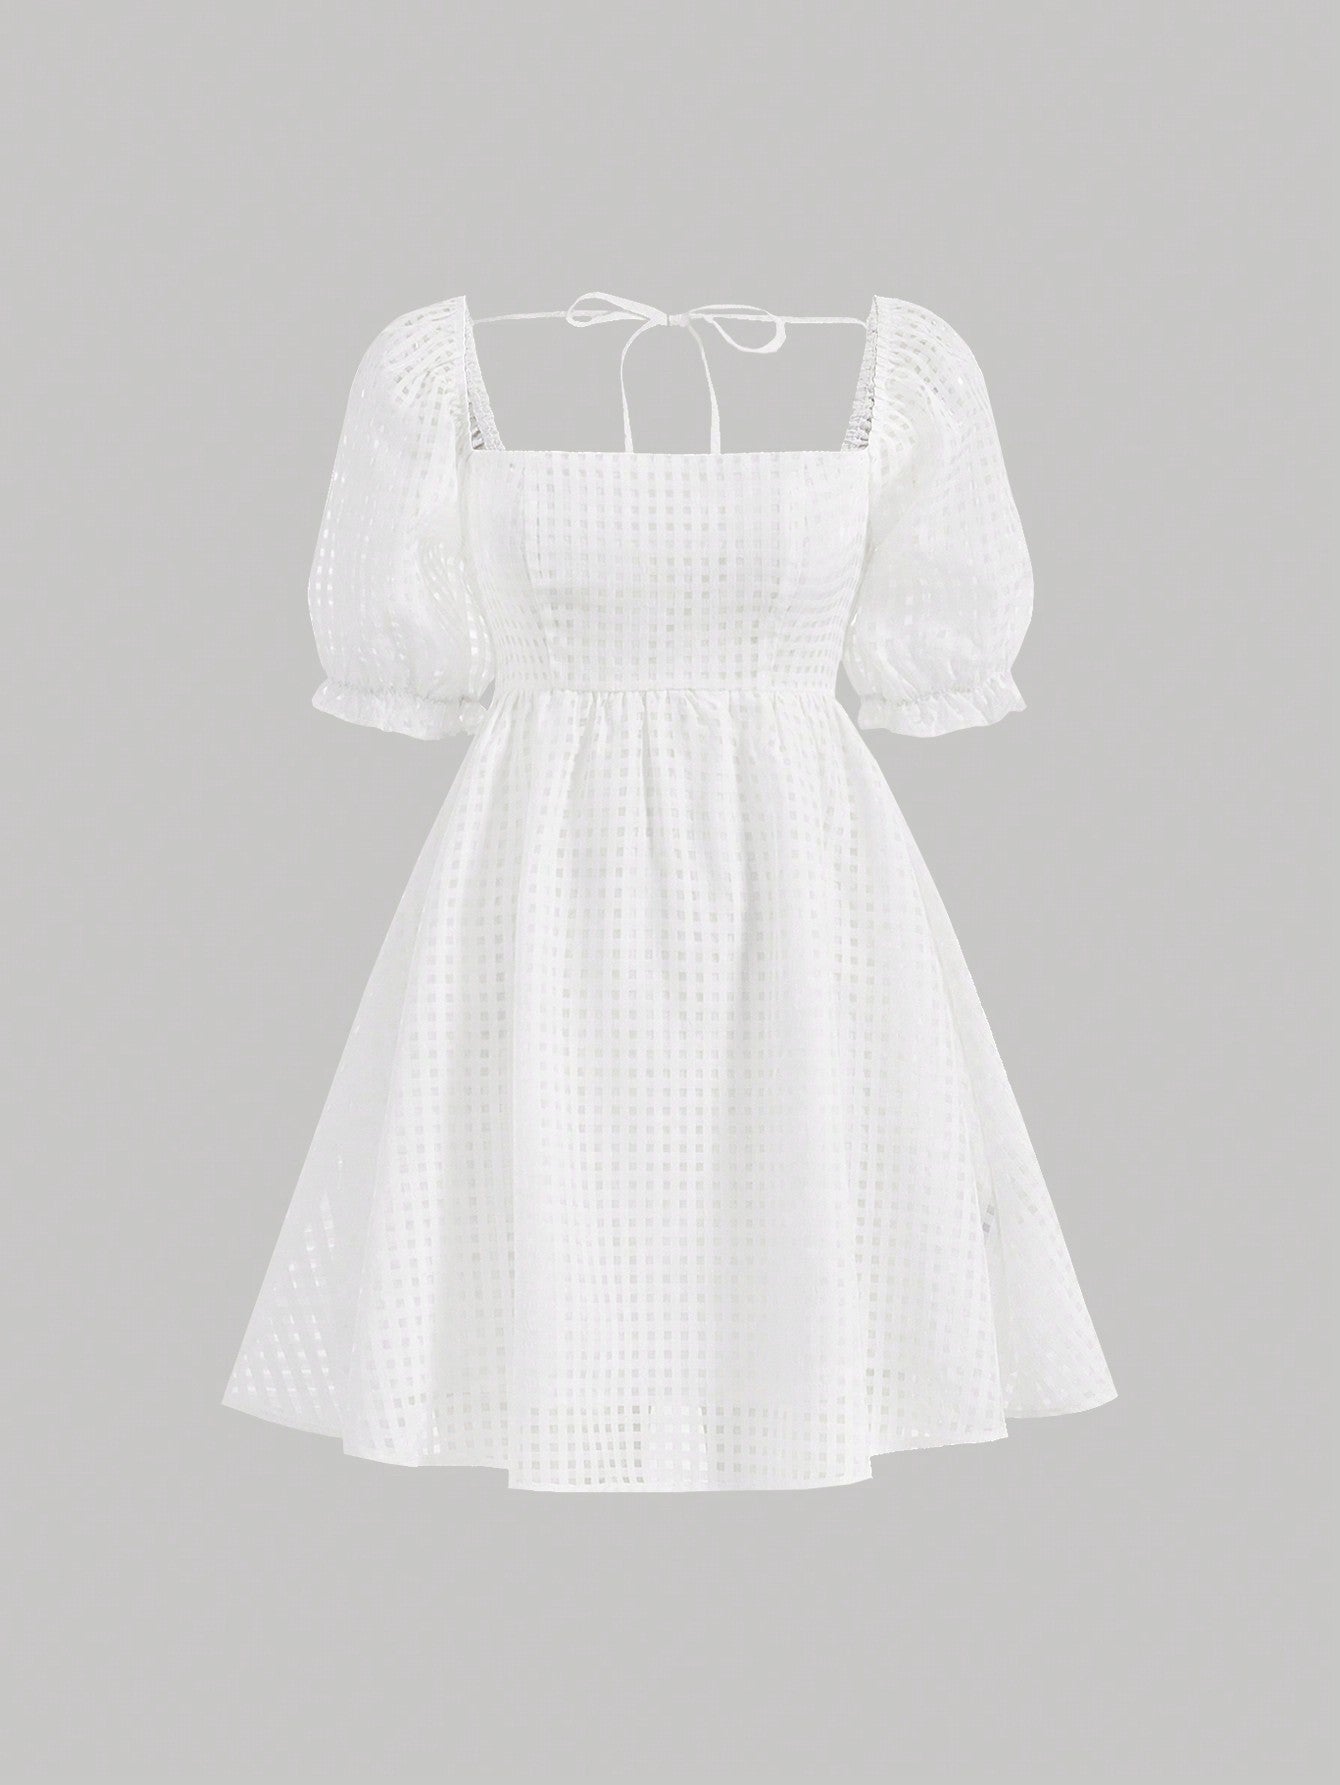 Women's Checkered Dress With Square Neckline, Puff Sleeves, Frilled Hem And Floral Patern Music Festival